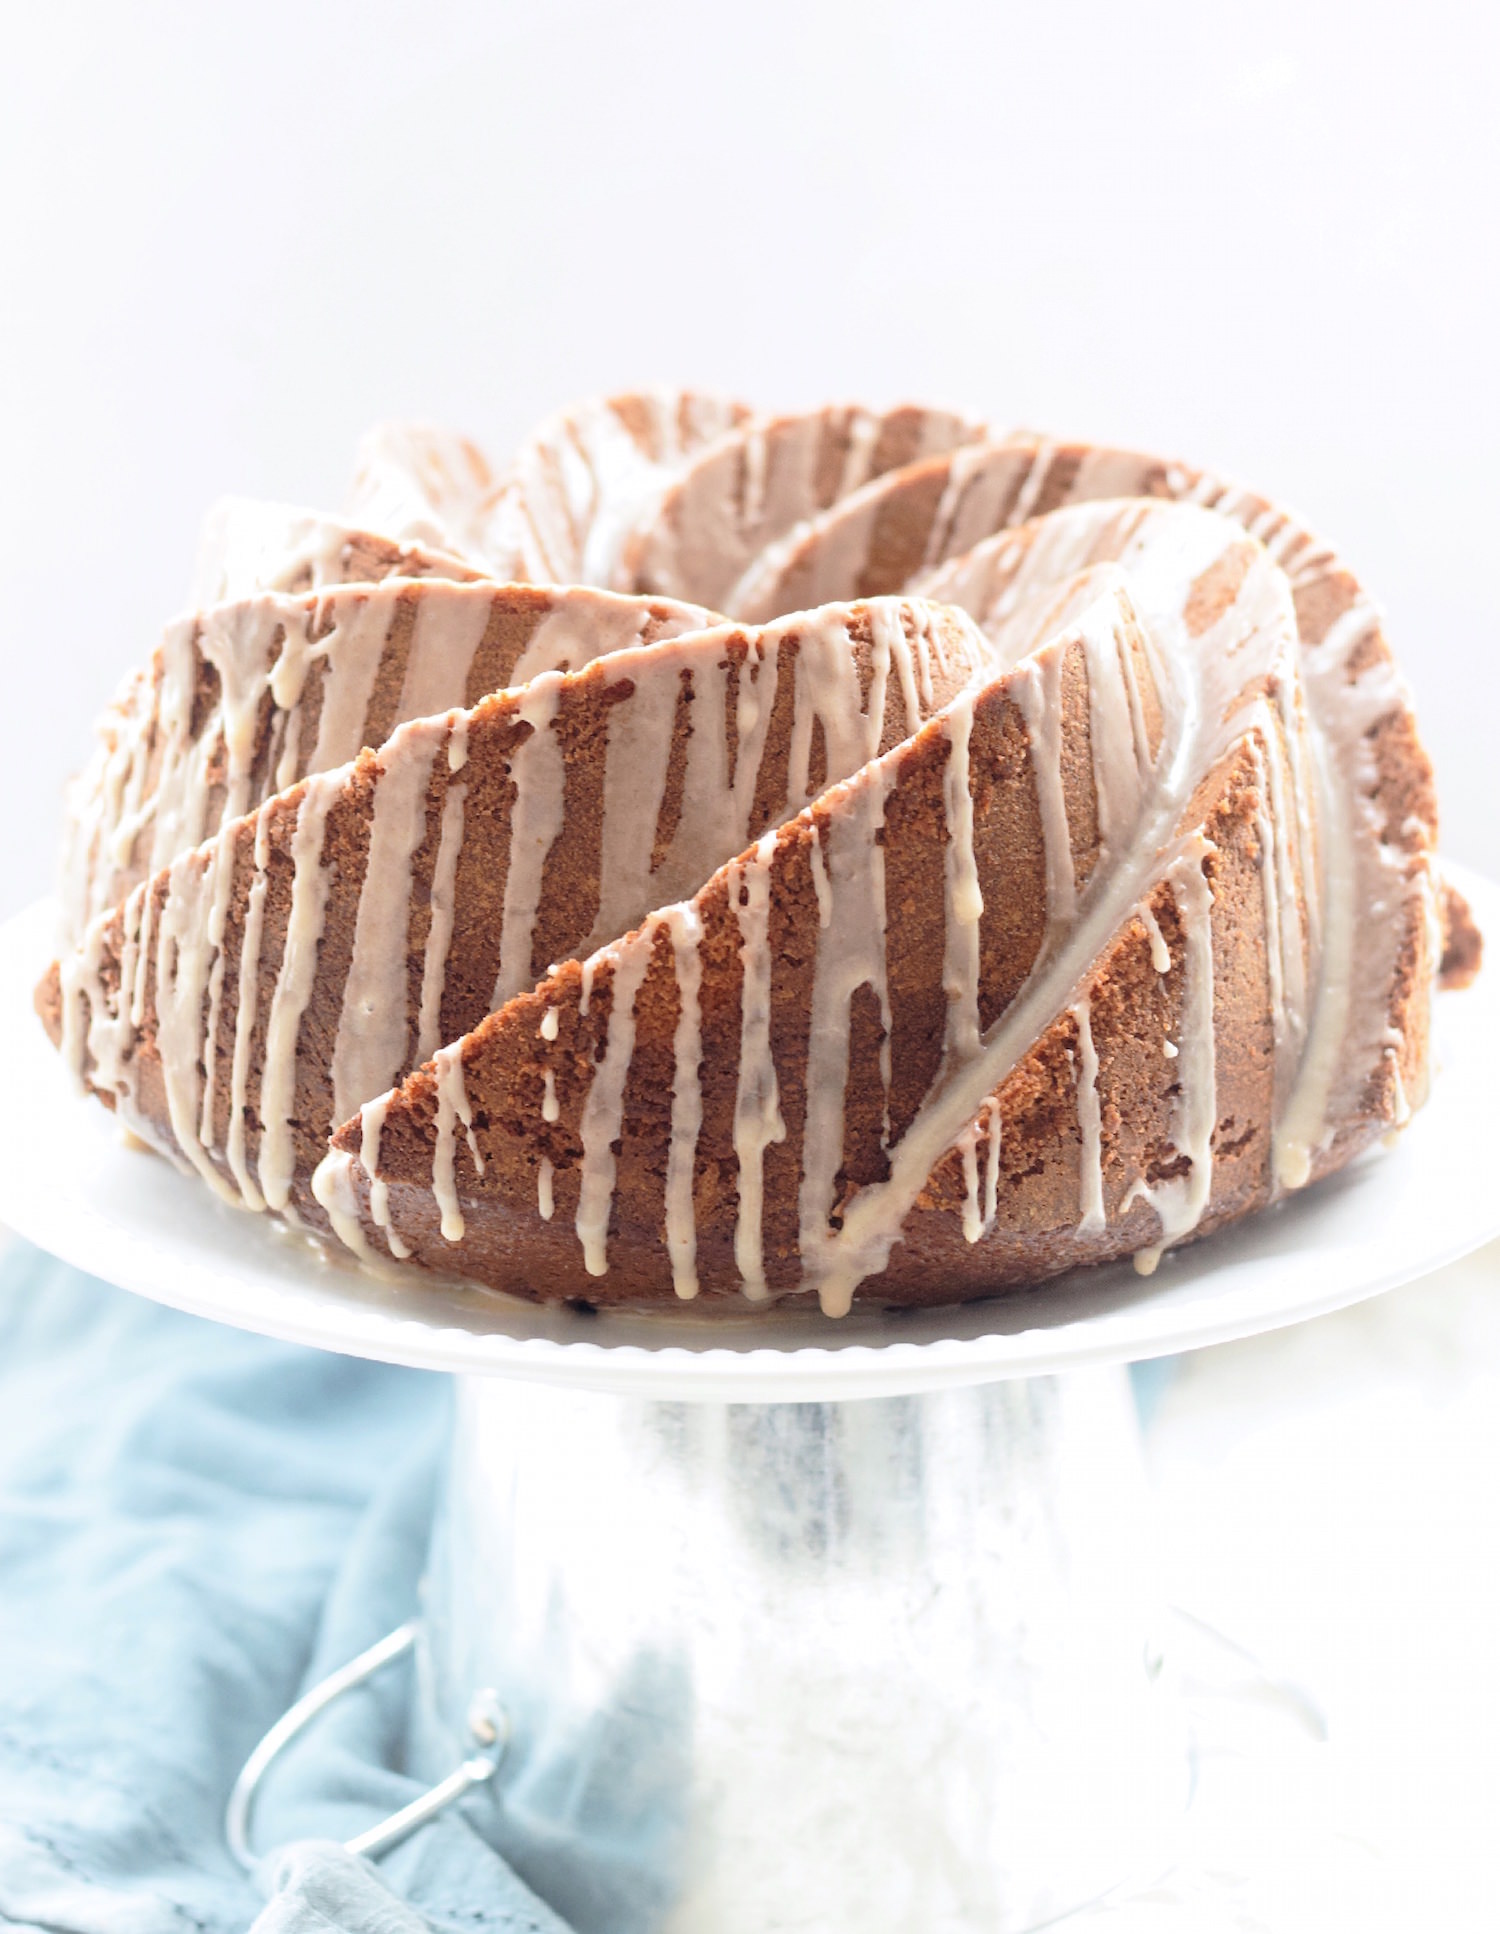 https://images.squarespace-cdn.com/content/v1/54a04011e4b0d1a214af85a9/1456694883313-U5IYDPCAZHOON4Z39OH5/Cinnamon+Swirl+Bundt+Cake%3A+one+bowl%2C+moist%2C+tender+vanilla+Bundt+cake+with+cinnamon+swirls.+Quick%2C+easy+and+completely+non-dairy%21+%7C+TrufflesandTrends.com